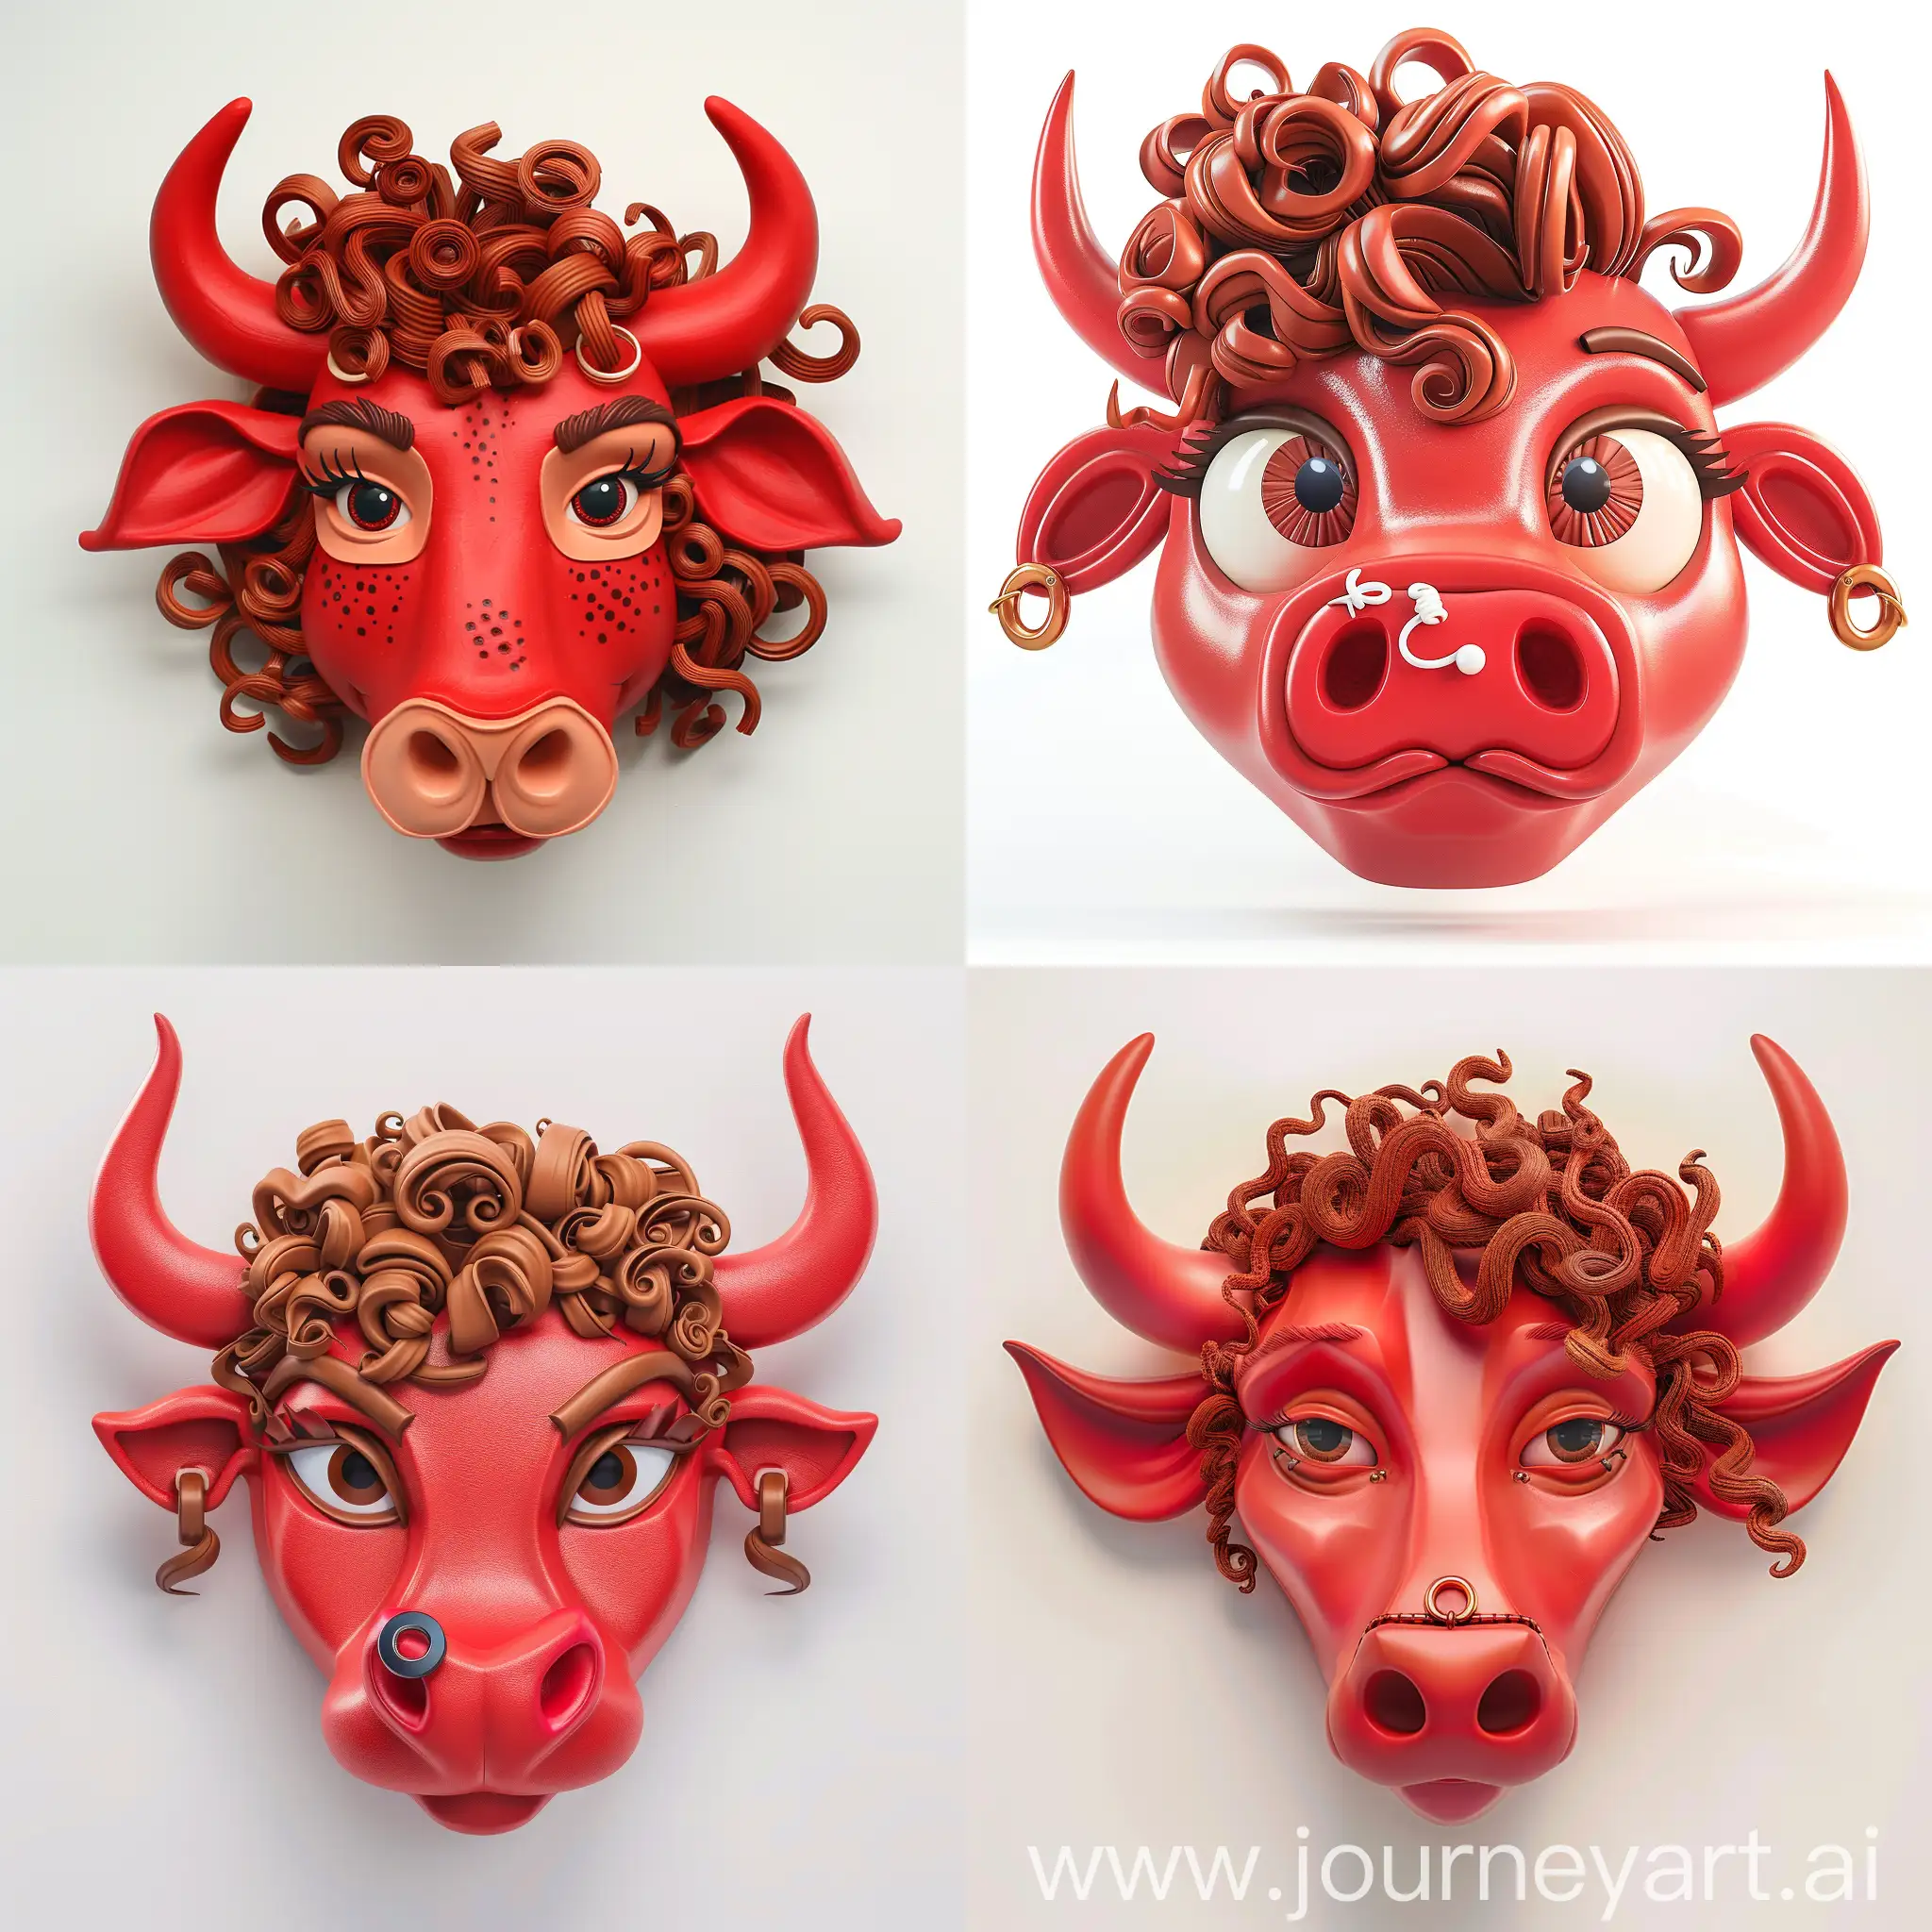 A red bull head, brown curly hair falls over the eyes, cute, nose ring, Plasticine style, a big red head, 3d, white background